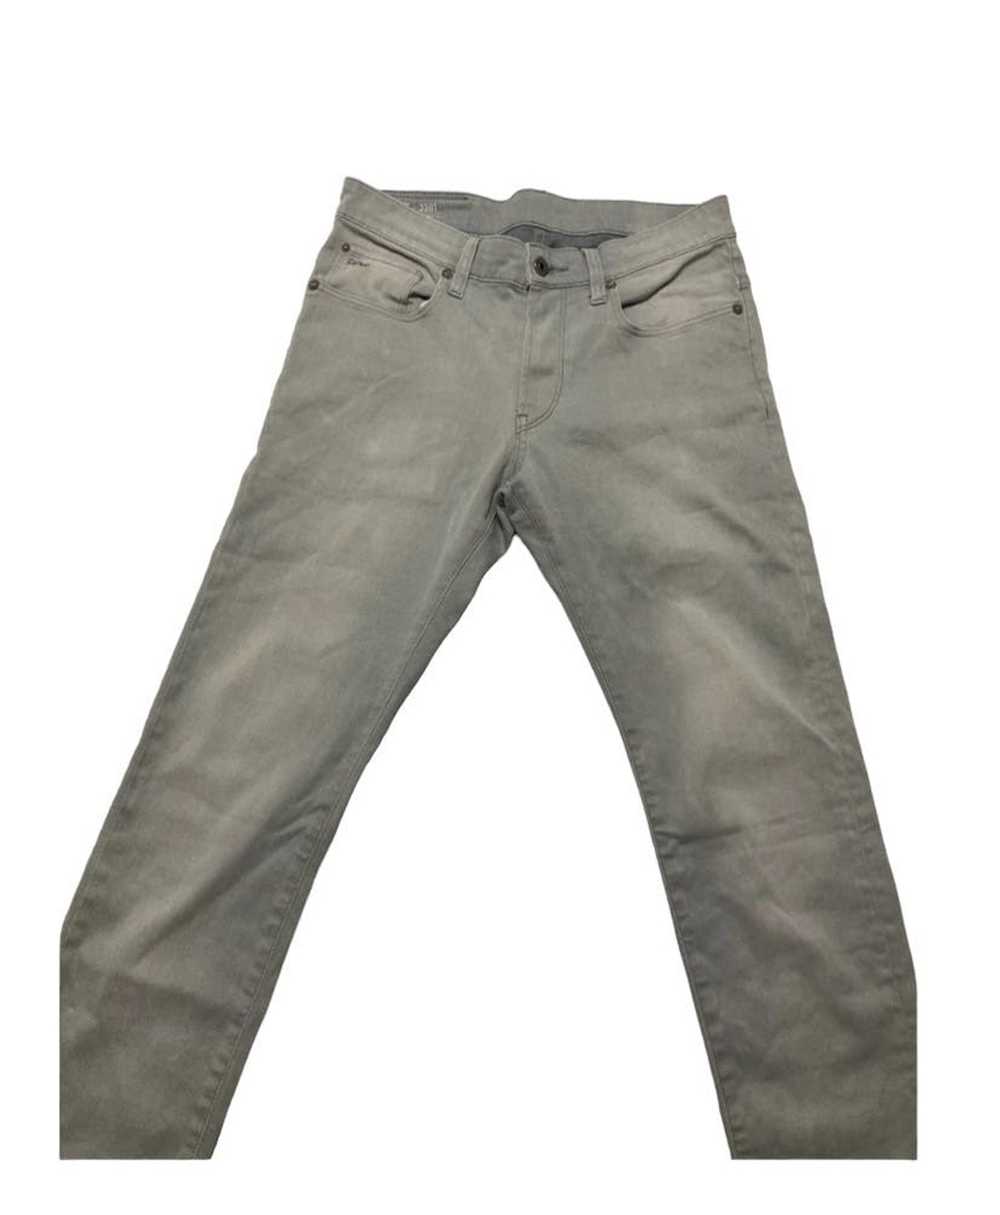 G Star Raw Authentic G-STAR RAW Jeans - image 4